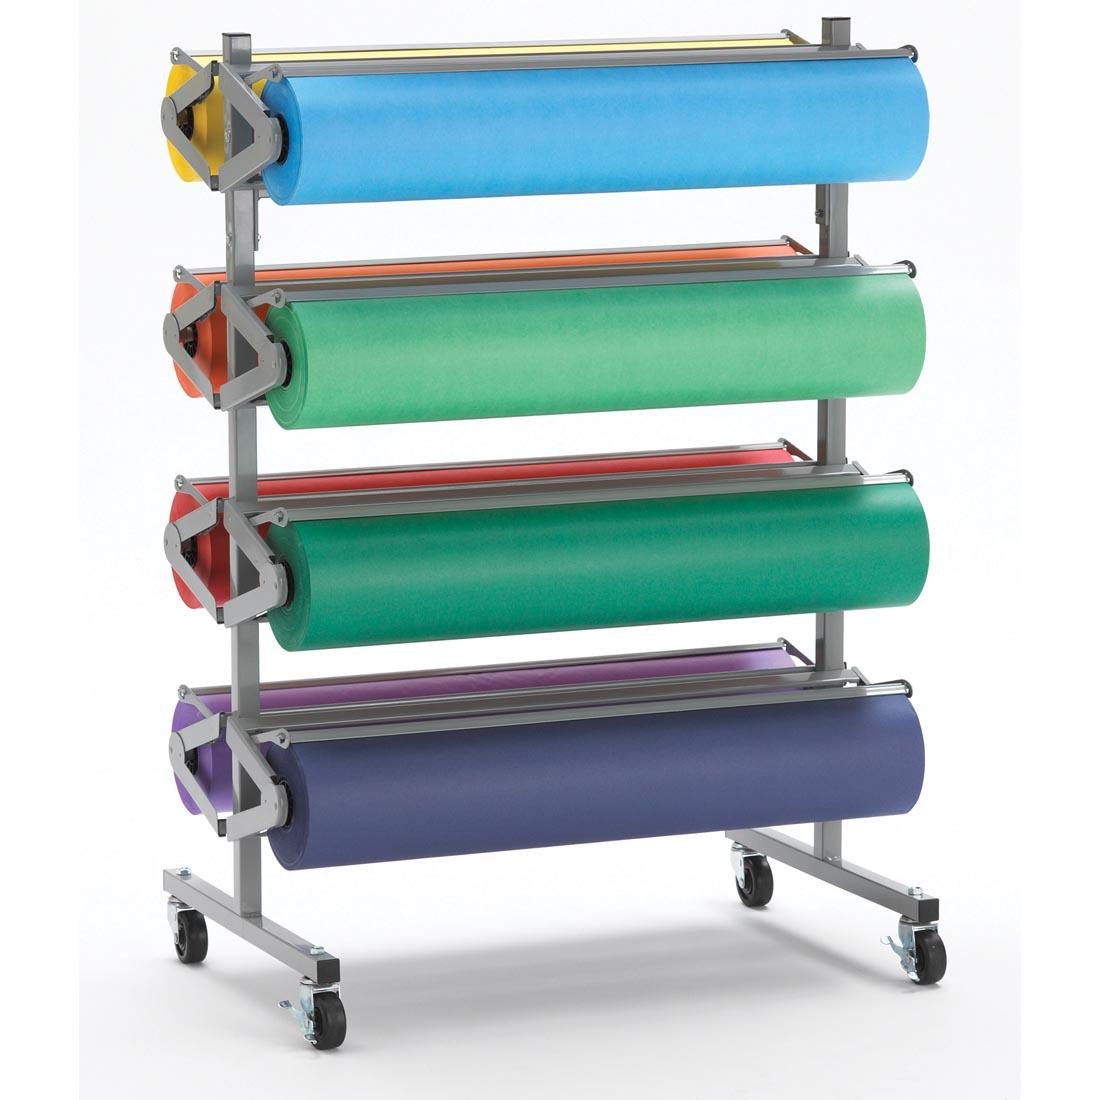 8-Roll Paper Rack Shown Loaded With Paper Rolls